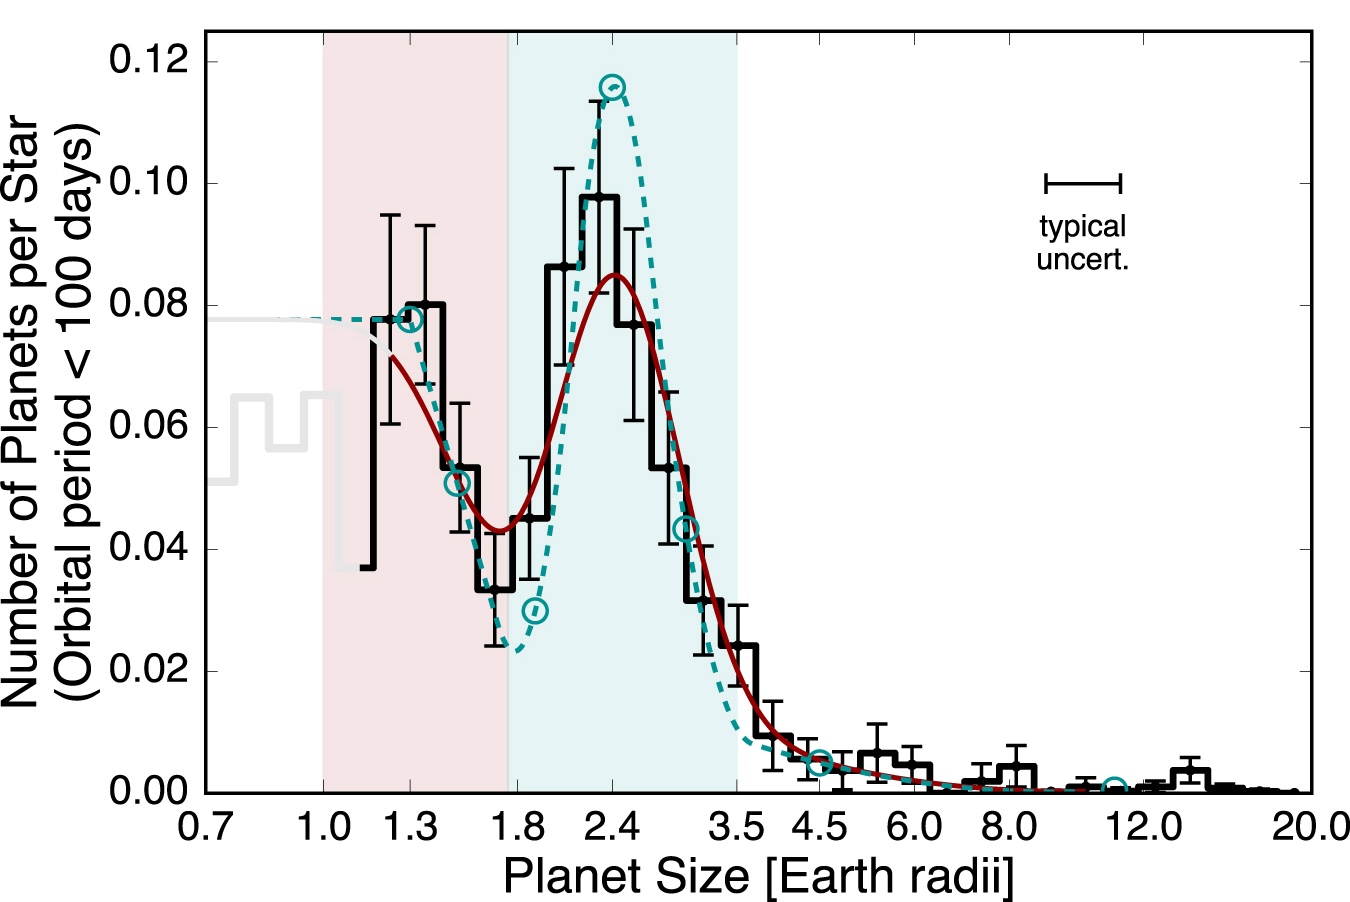 Super earth regime highlighted between ~1-1.8 Earth radii, sub Neptune regime highlighted between ~1.8-3.5 Earth radii. Two distinct peaks around 1.3 and 2.4 Earth radii, and a distinct valley centered around 1.7 Earth radii.